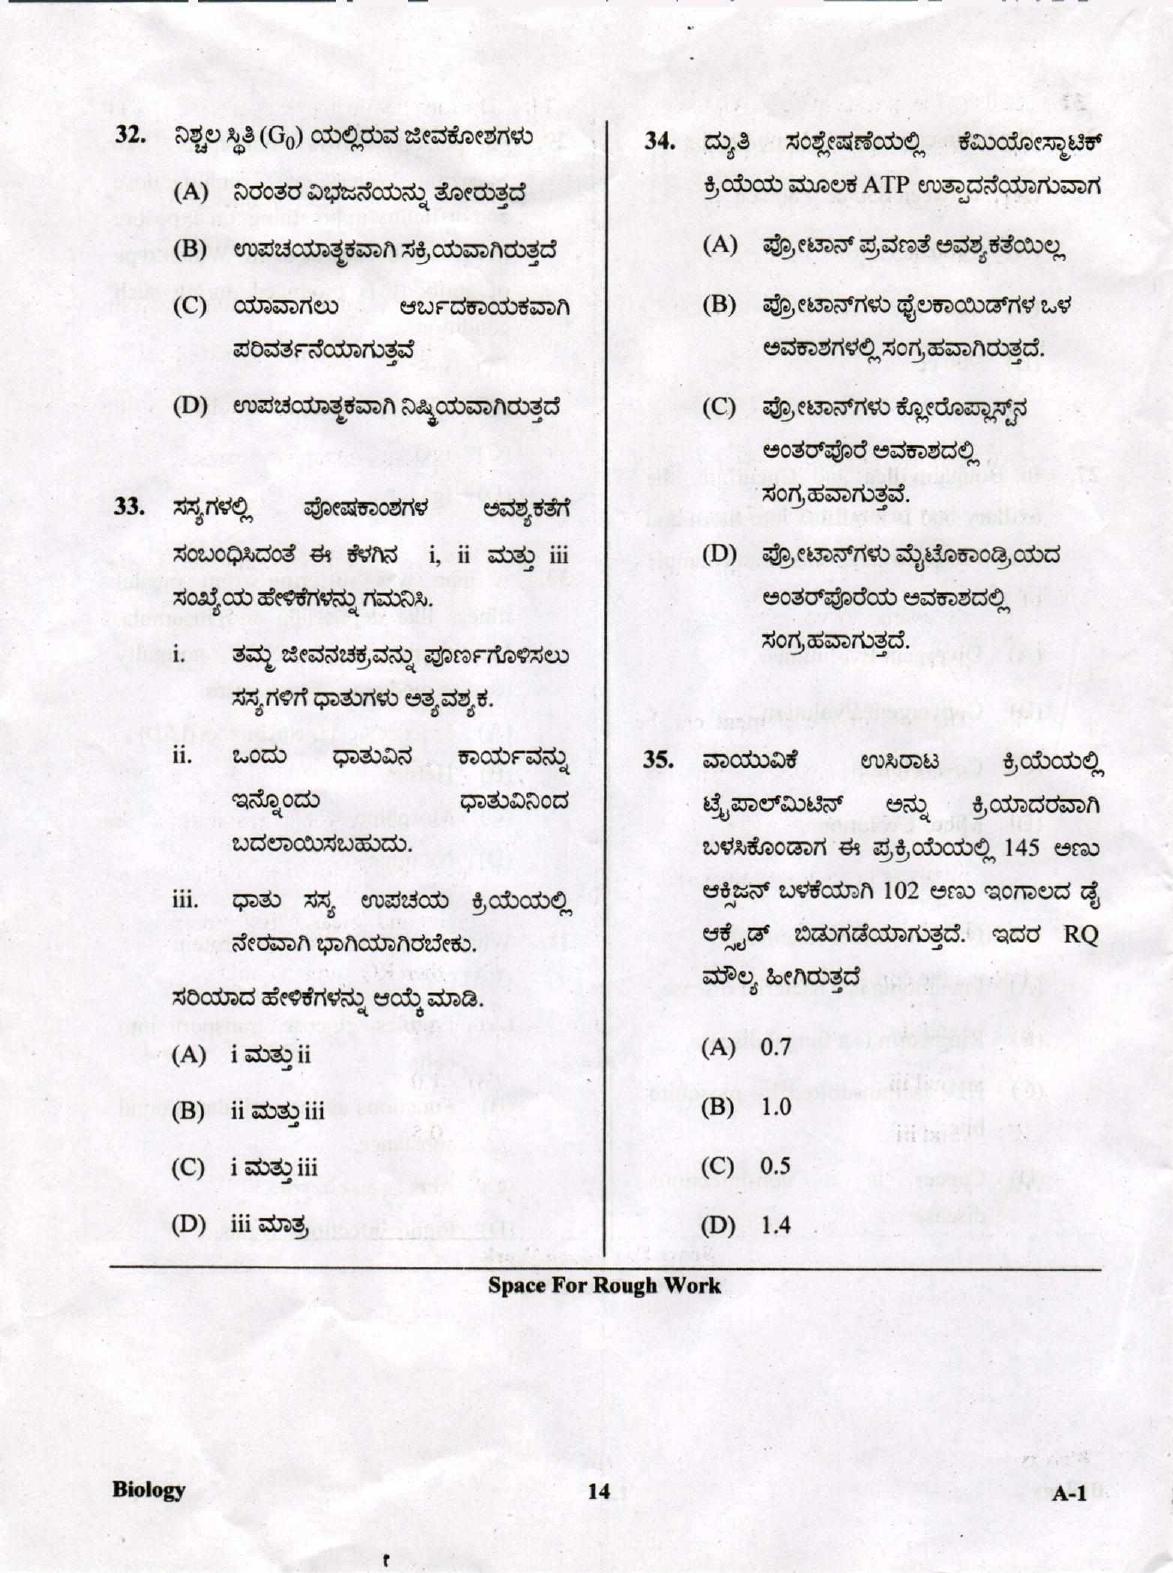 KCET Biology 2019 Question Papers - Page 14